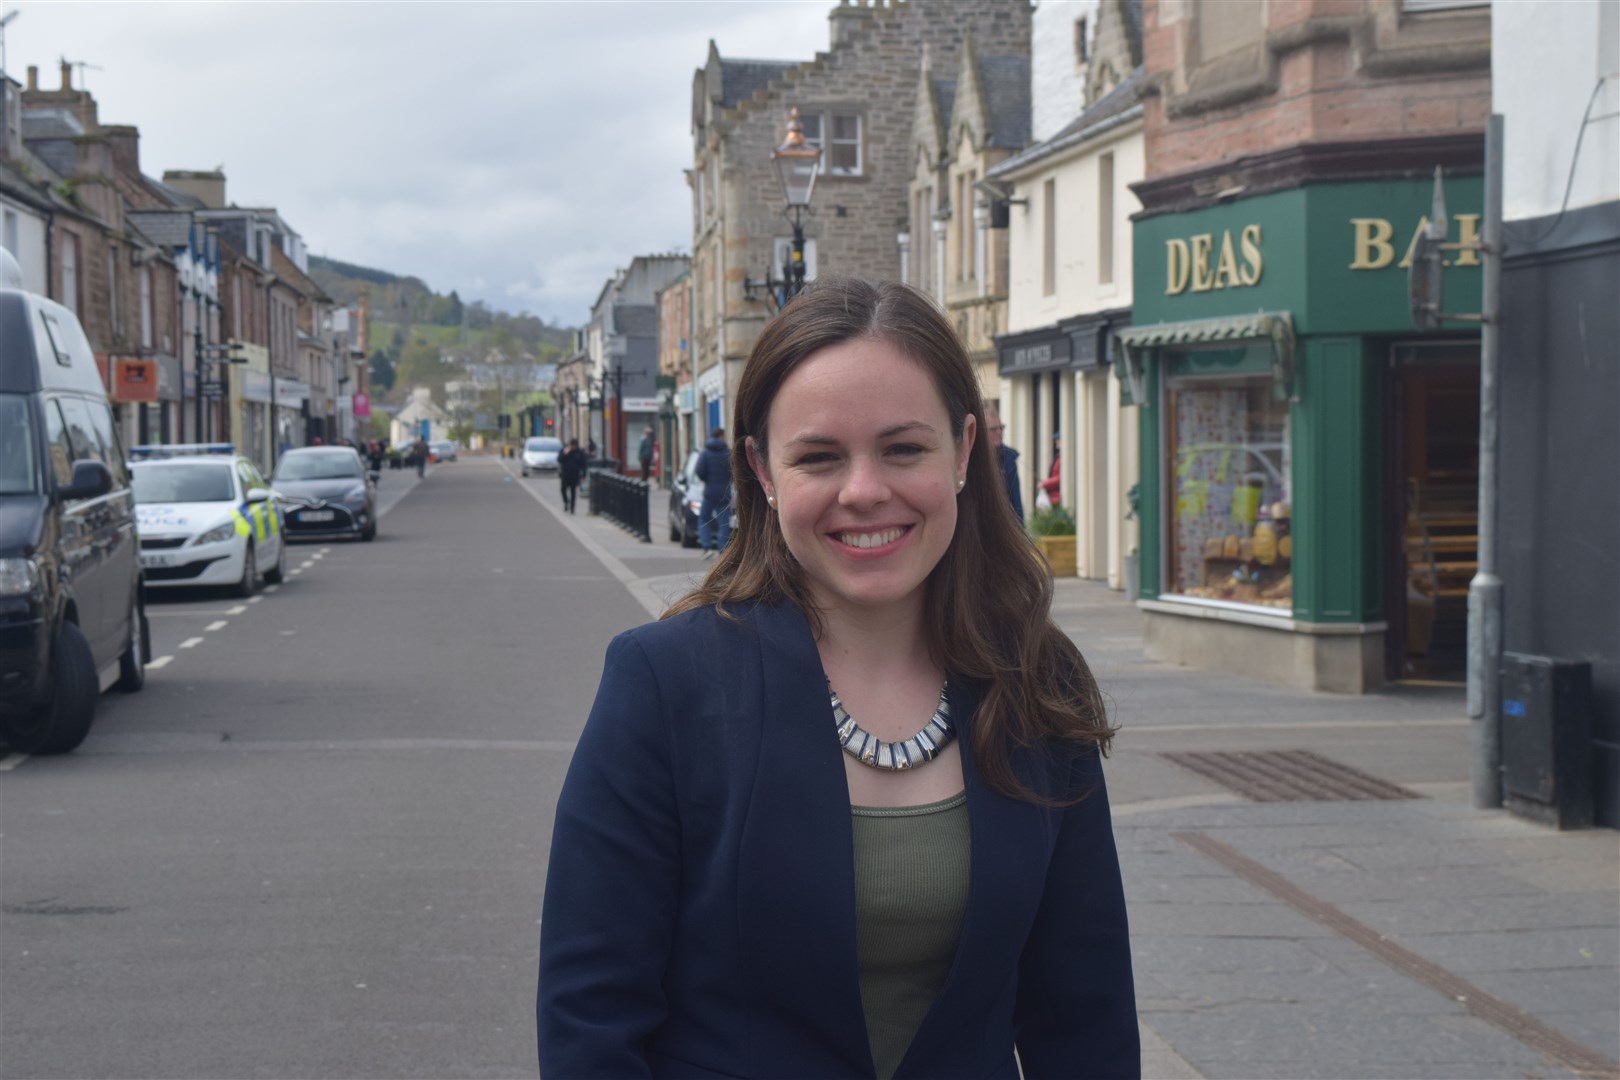 Kate Forbes MSP was enthusiastic about rail travel.